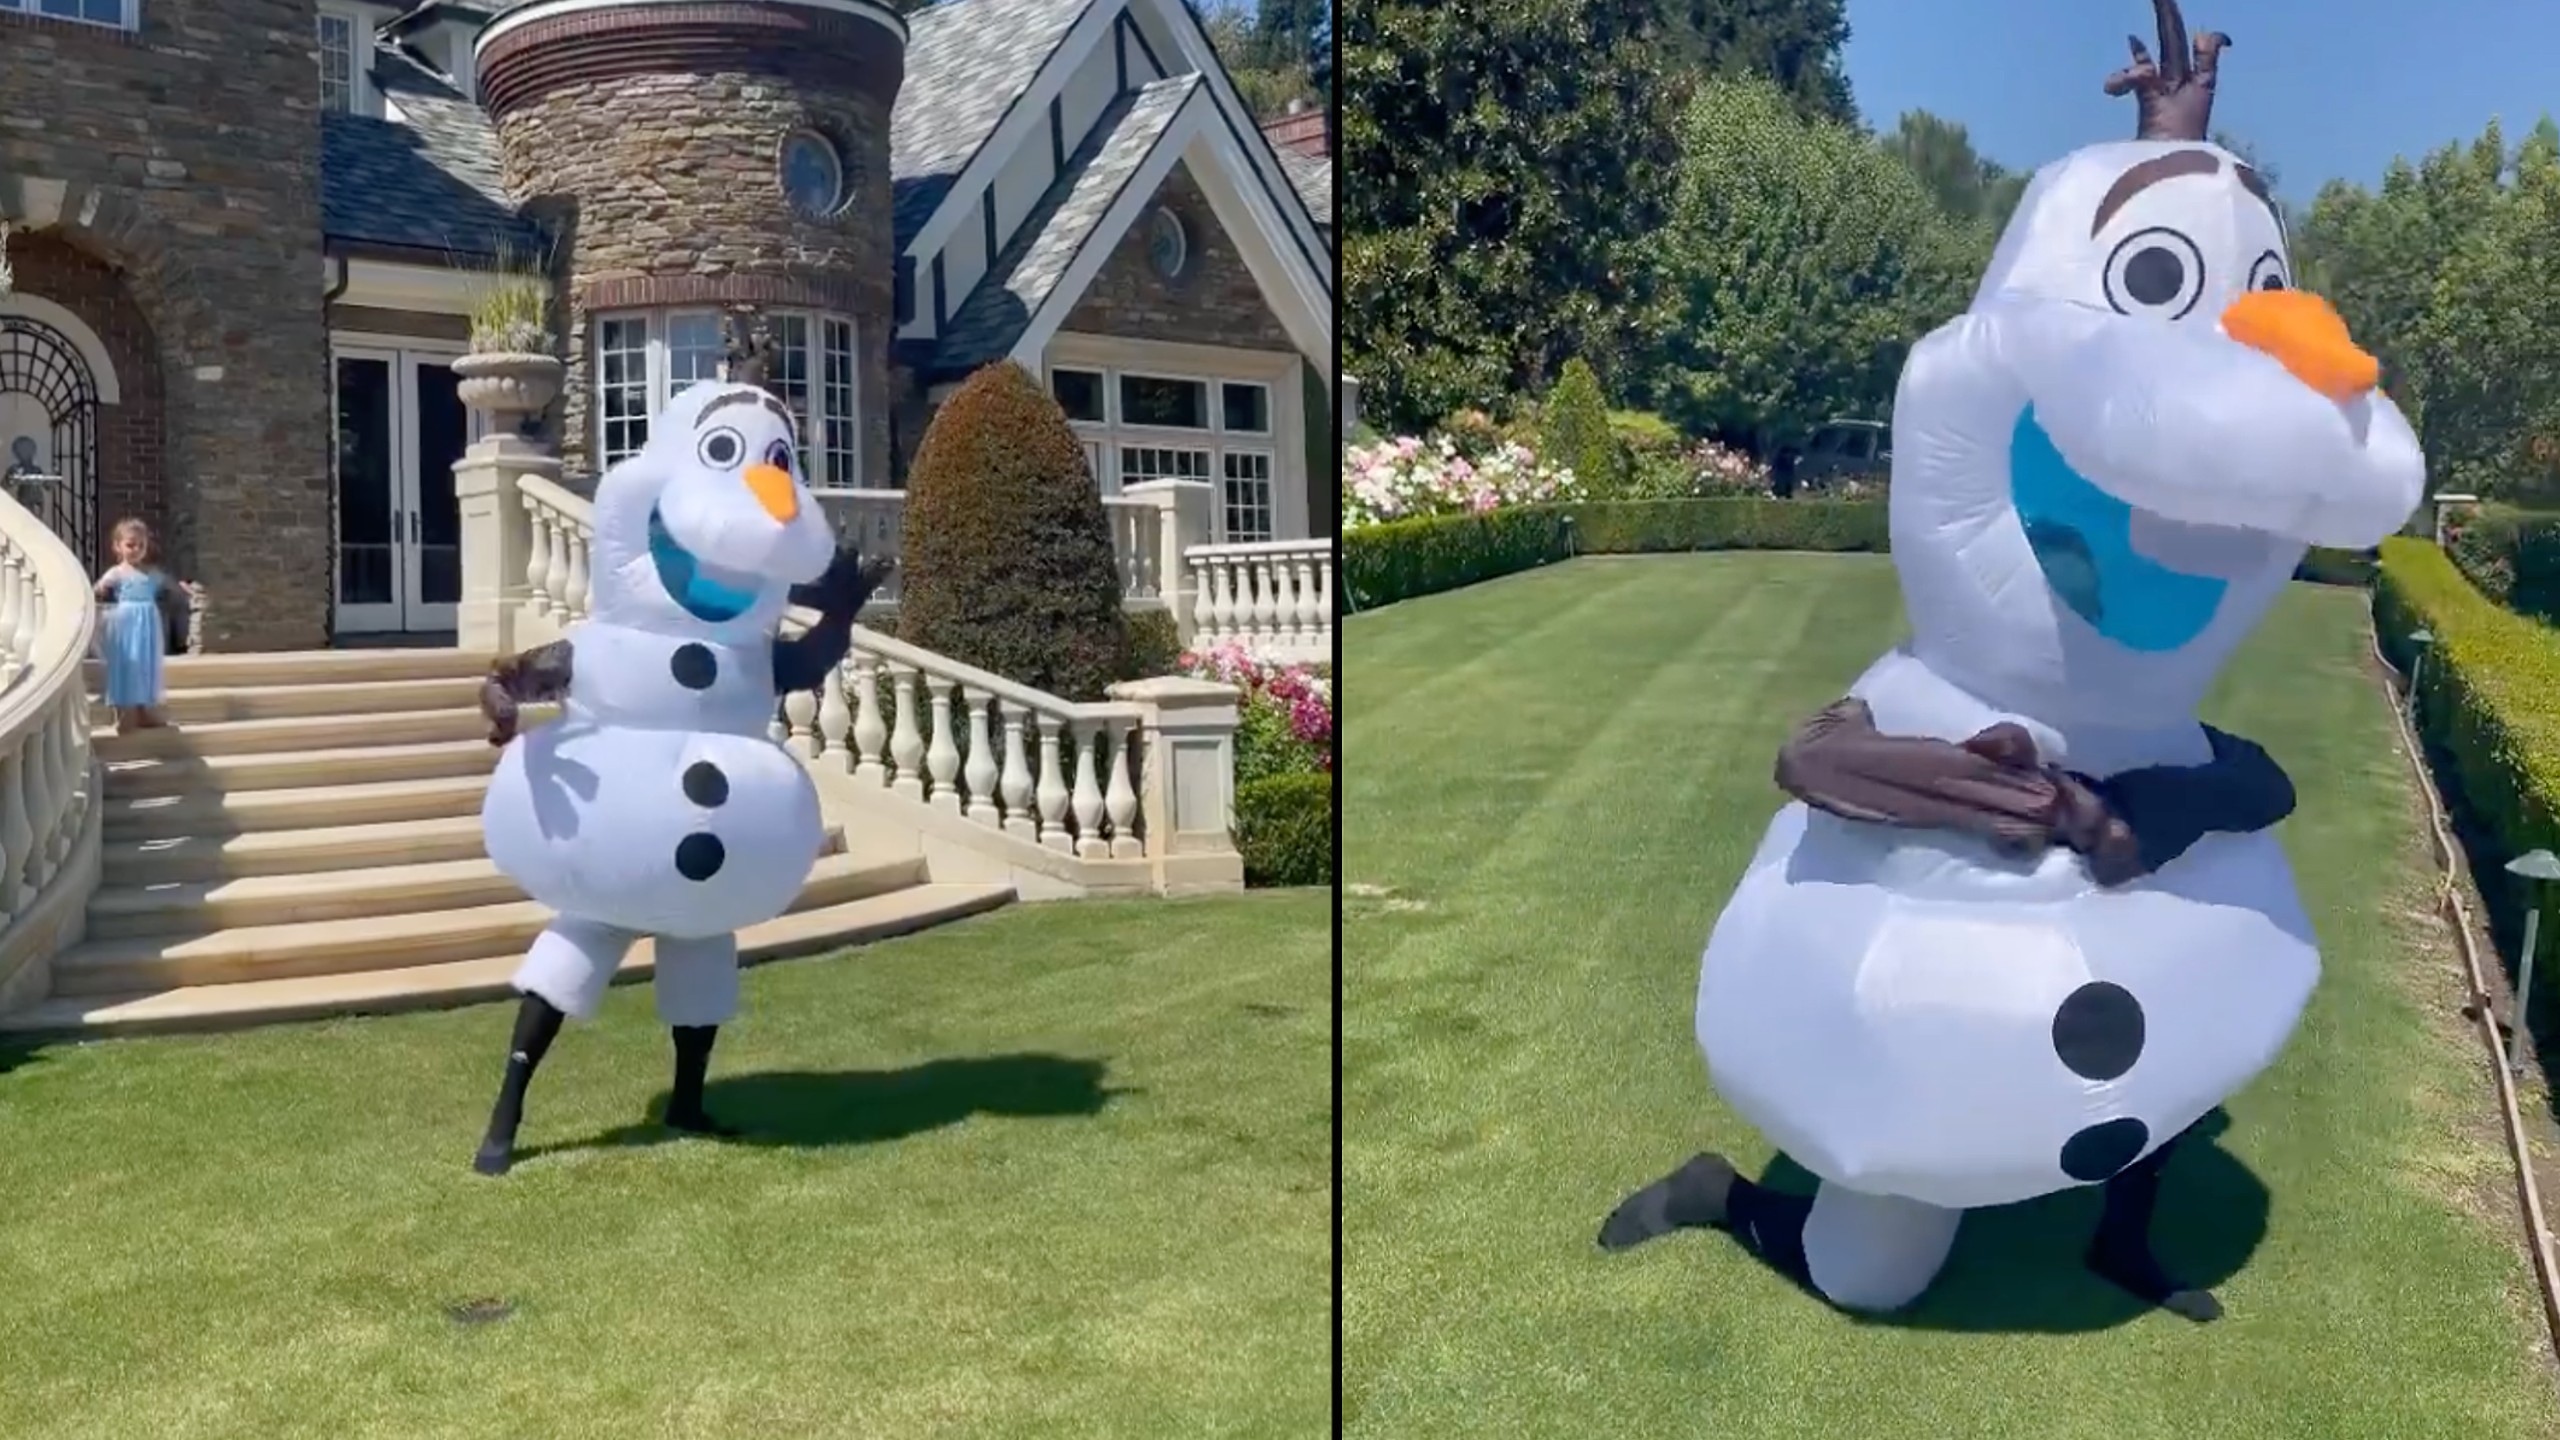 The Miz nails adorable dance performance dressed as Olaf